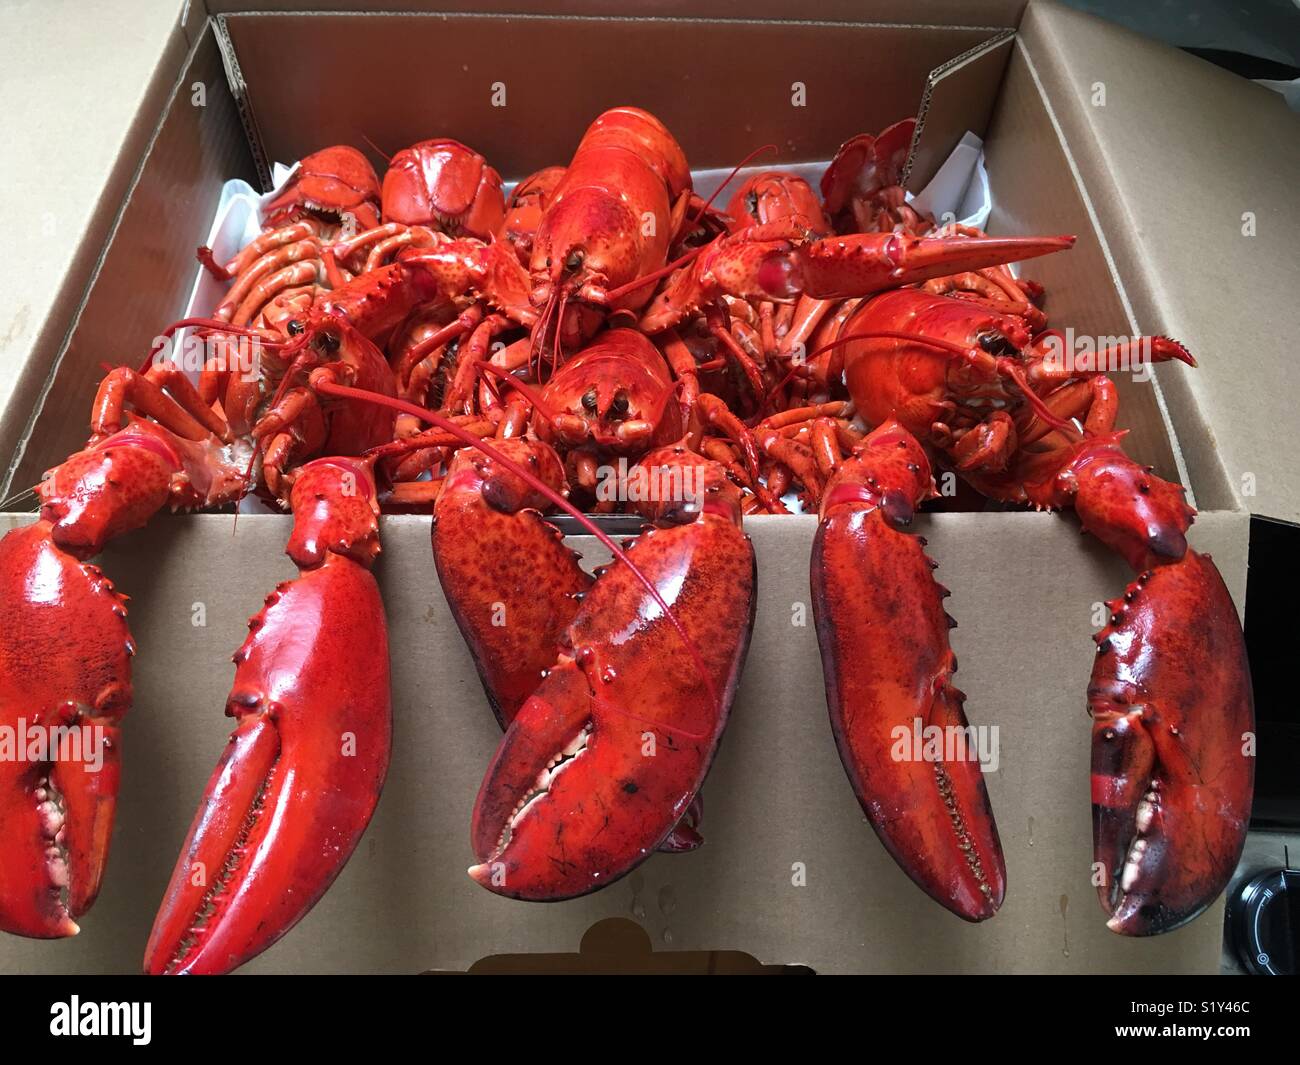 Delicious red cooked lobster ready for the dinner table. Stock Photo